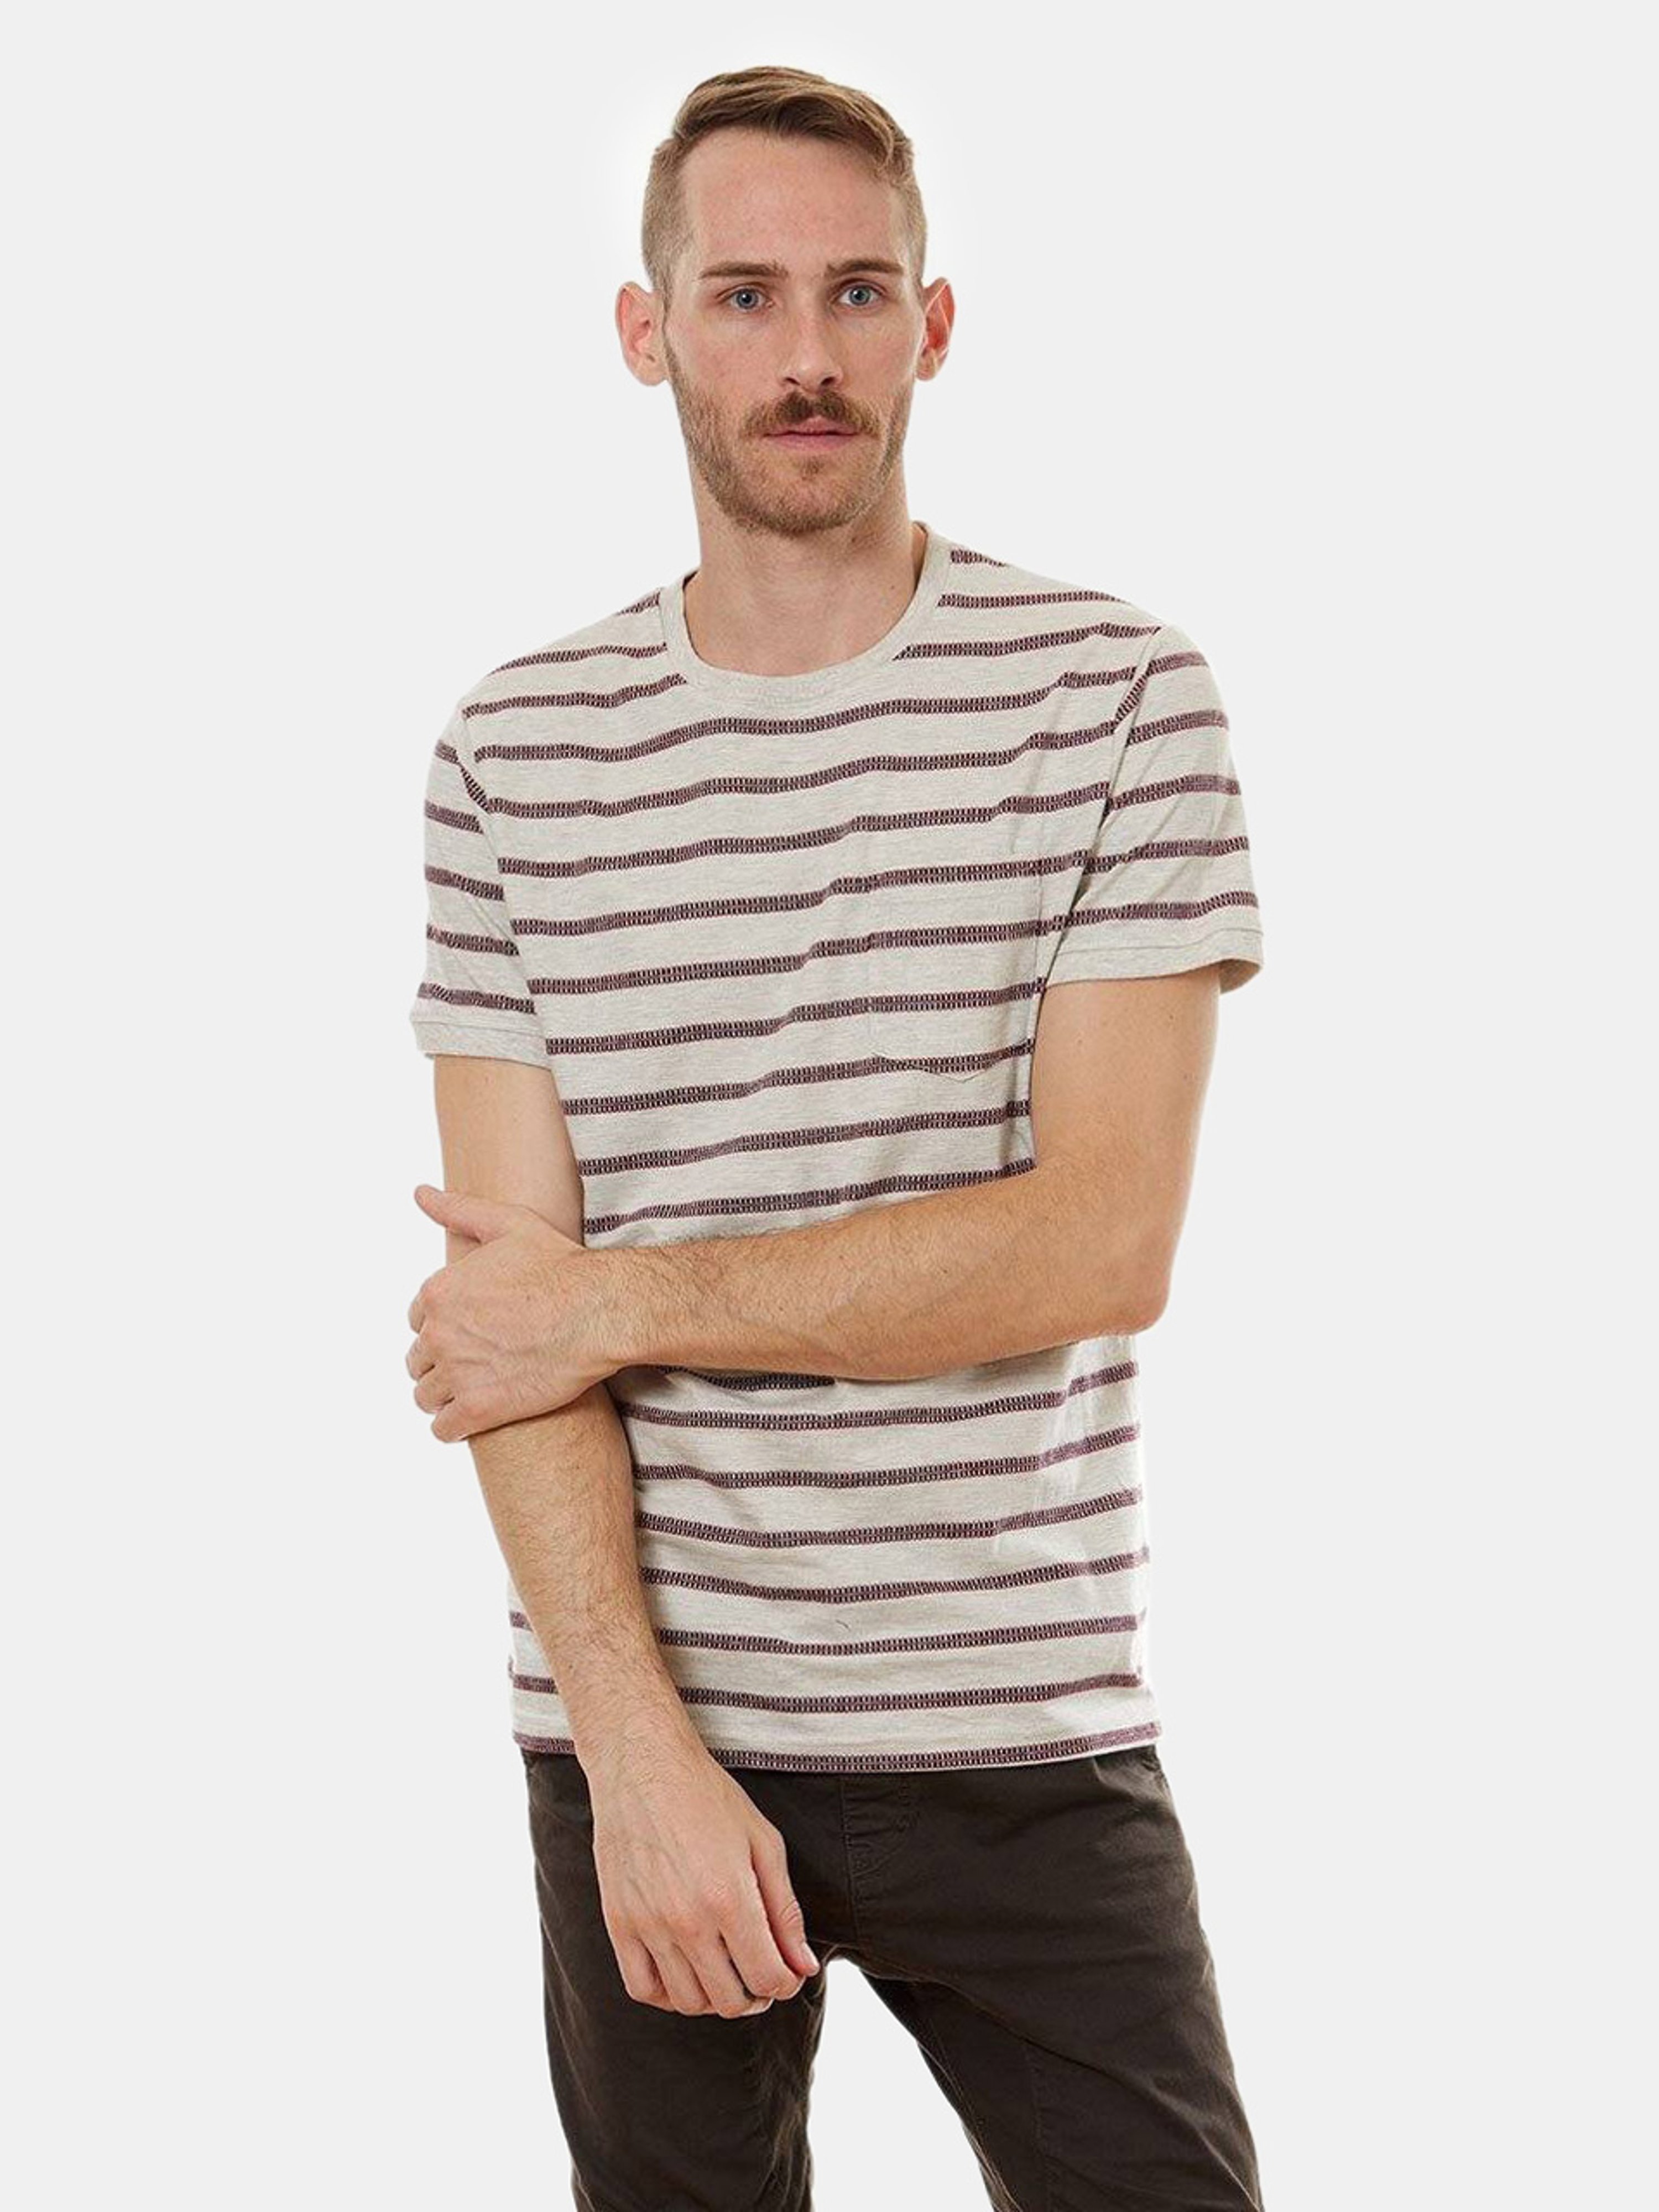 Px Marco Jacquard Tee In Red